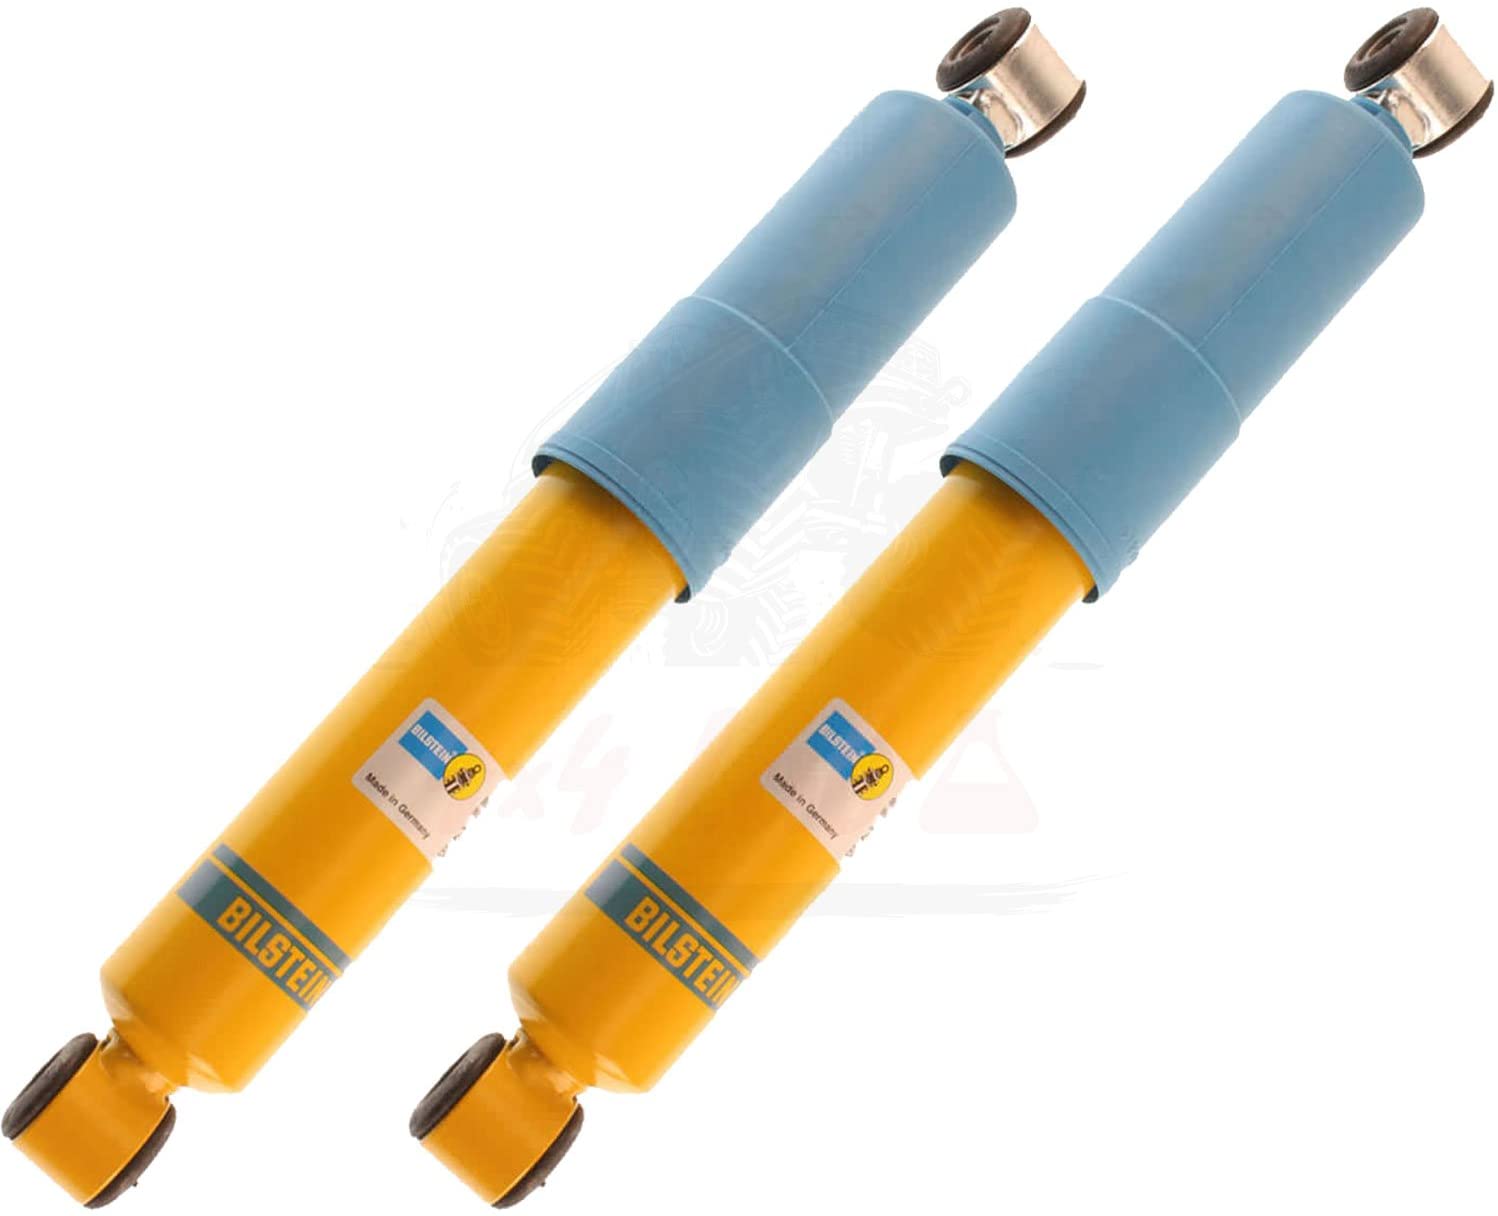 Bilstein B6 Performance Series 2 Front Shocks Kit for 55-'67 Volkswagen Transporter Ride Monotube replacement Gas Charged Shock absorbers part number 24-000321